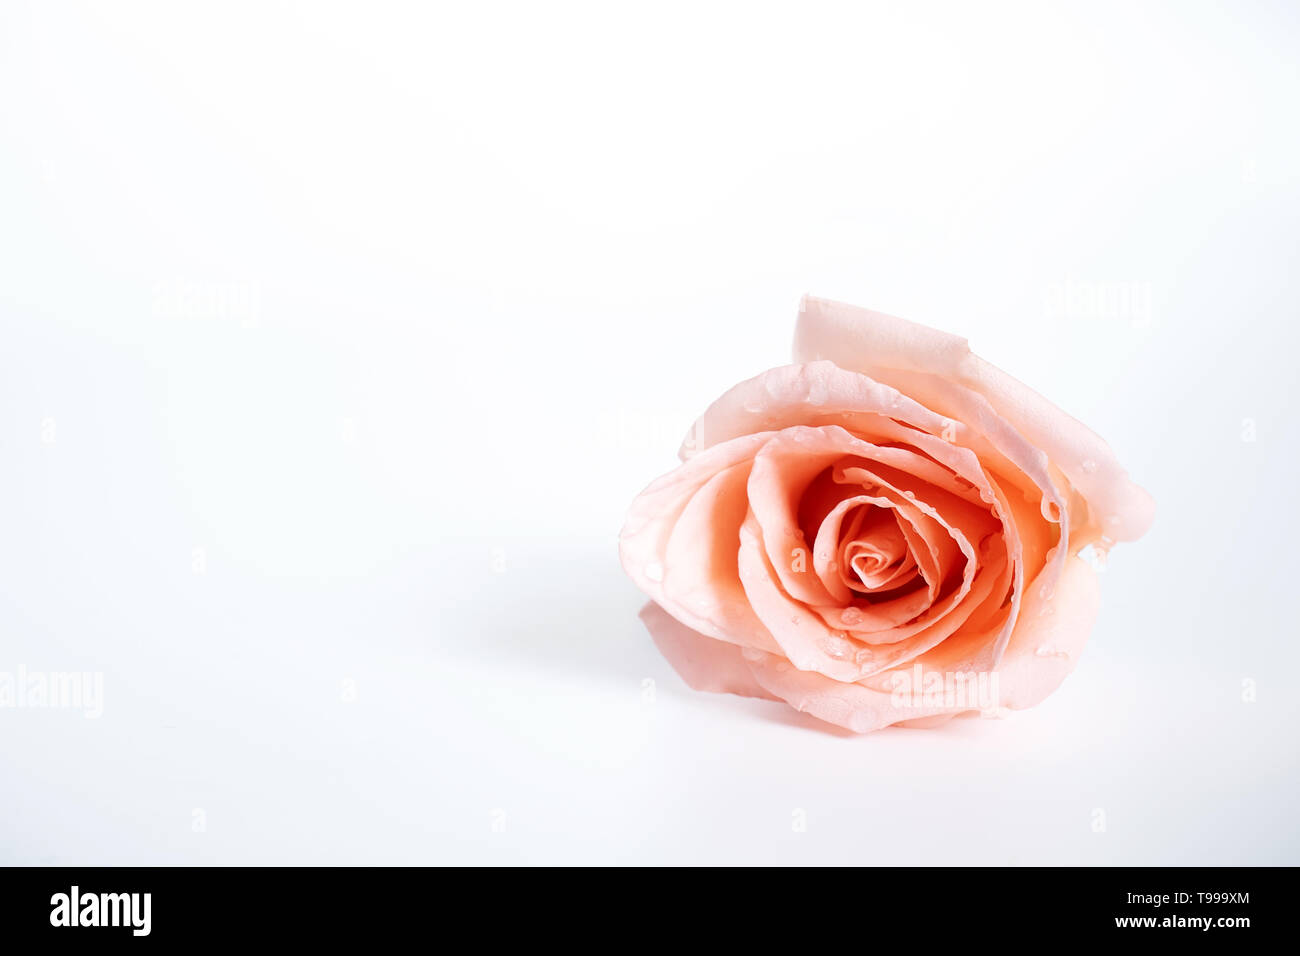 top view of single pink rose flower blooming with drops of water on the petals isolated on white background Stock Photo